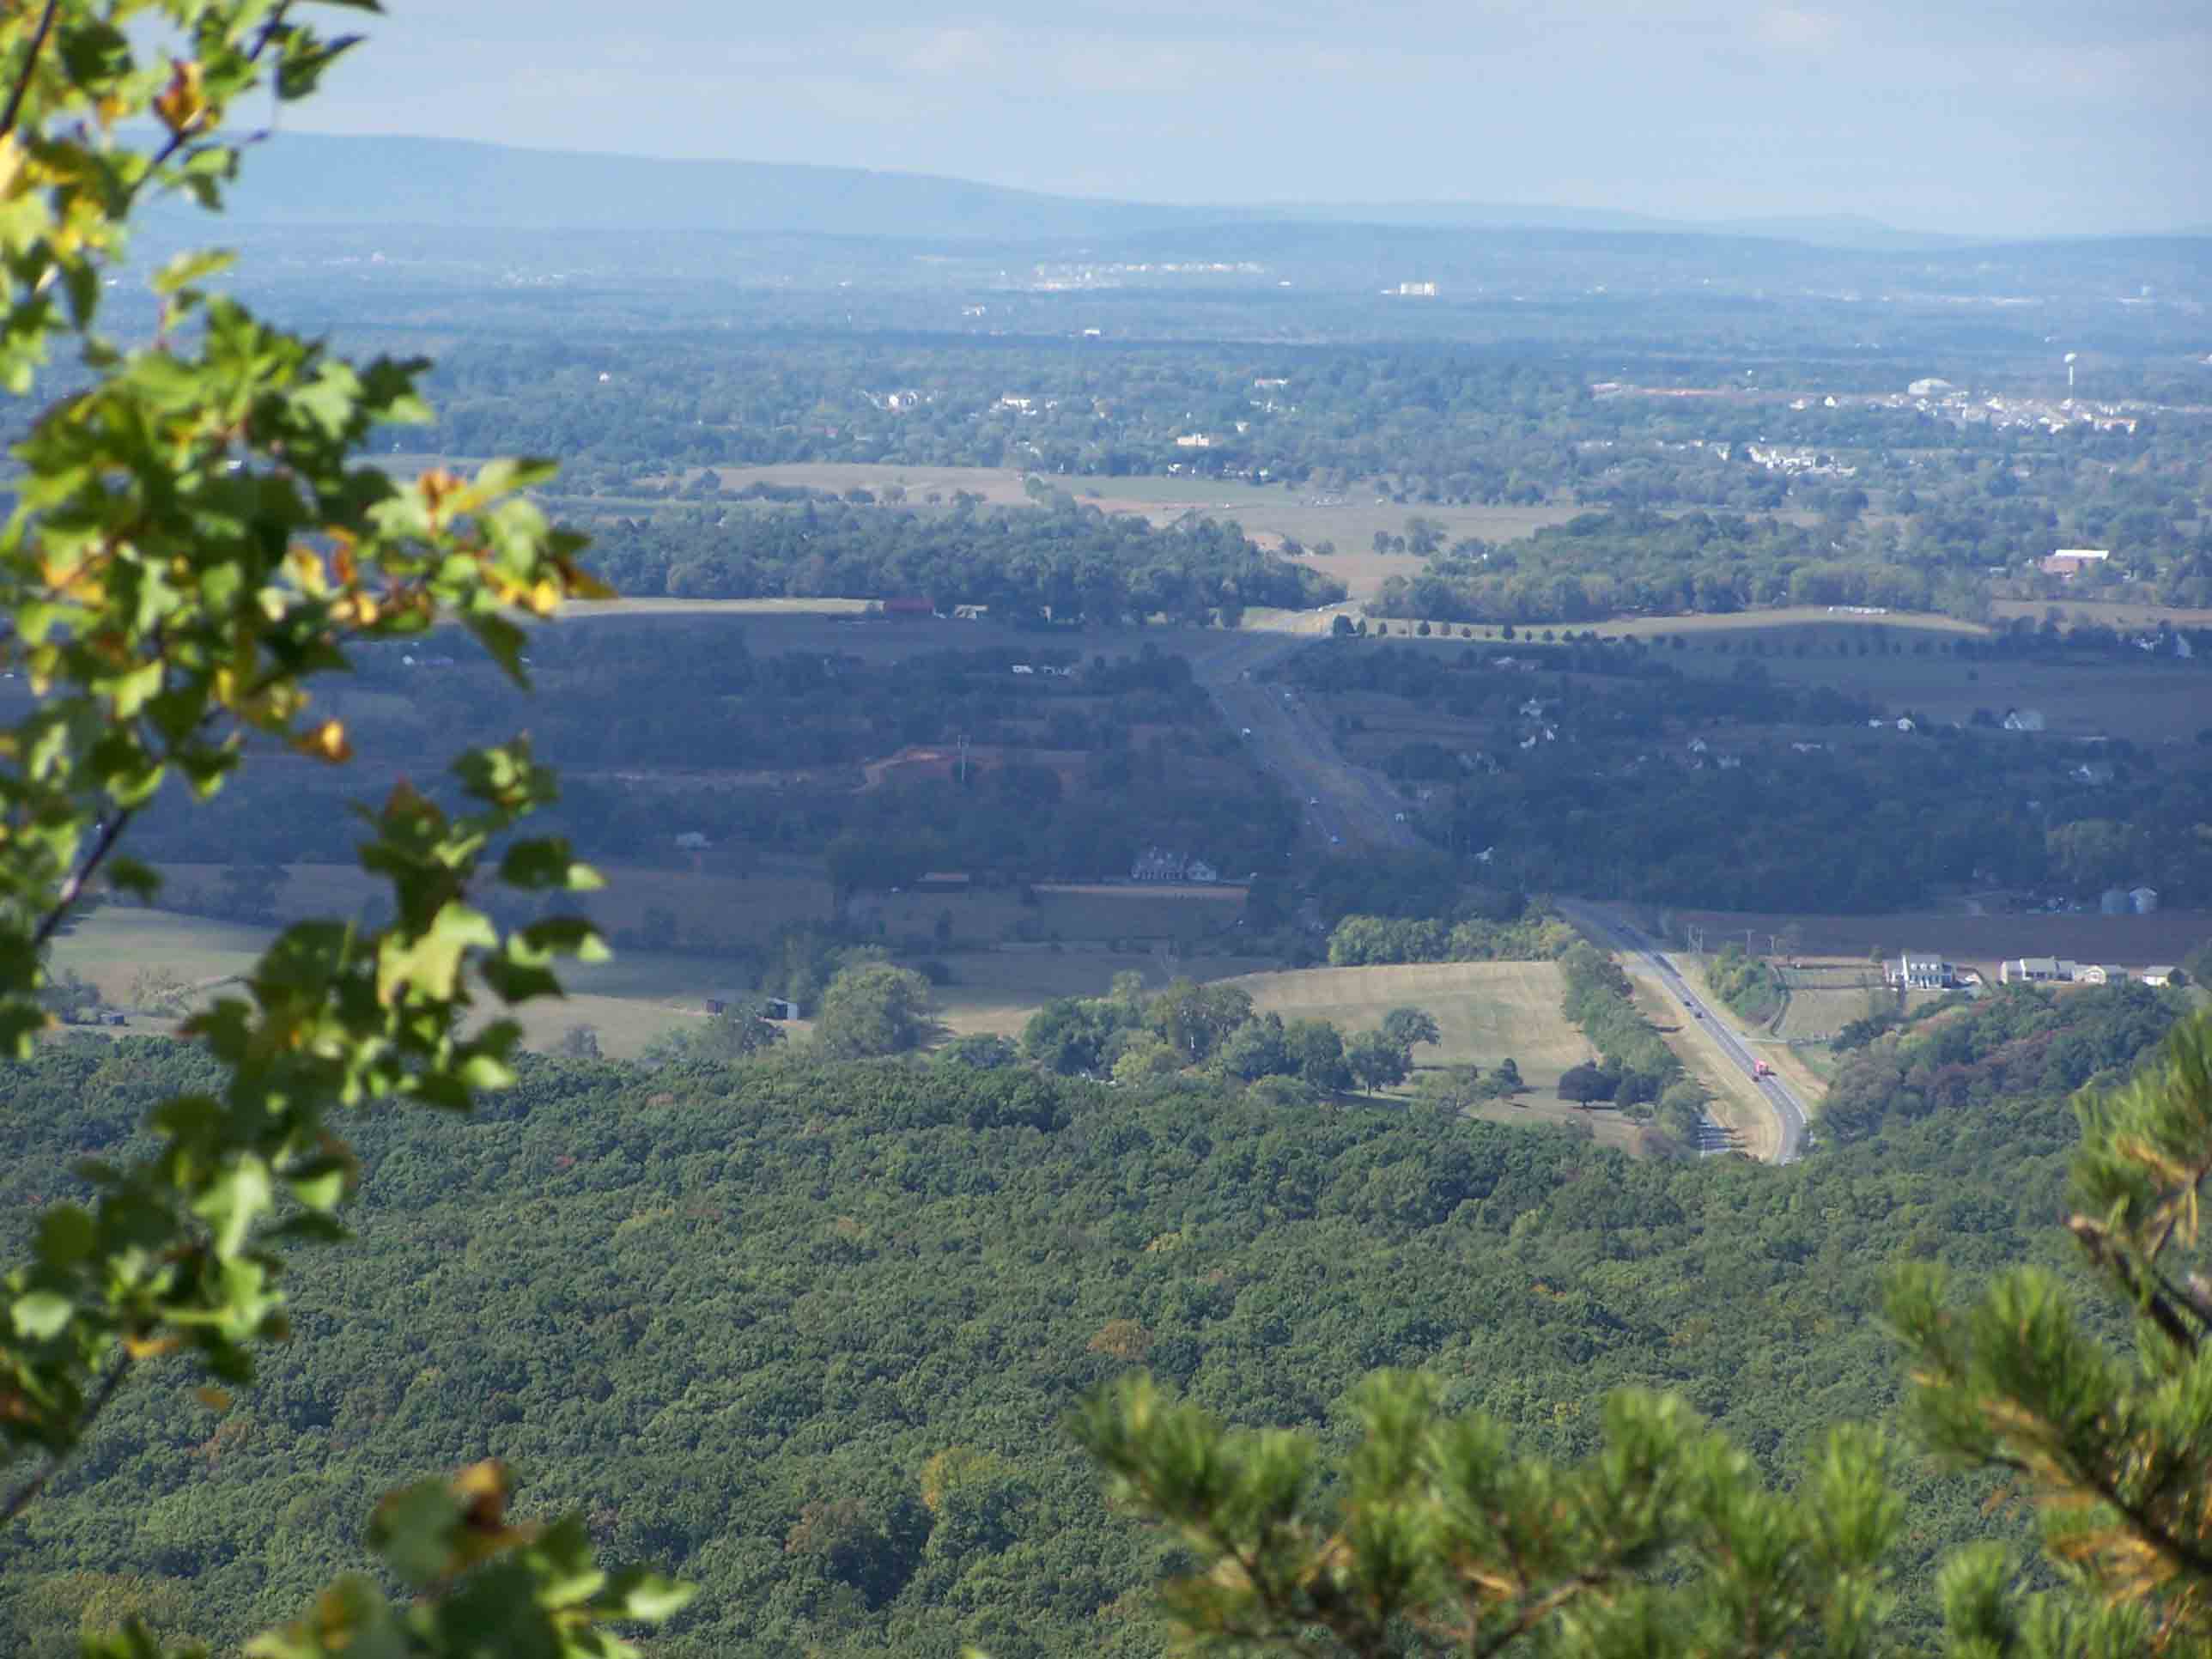 mm 0.6 - View from Bears Den Rocks. Courtesy at@rohland.org